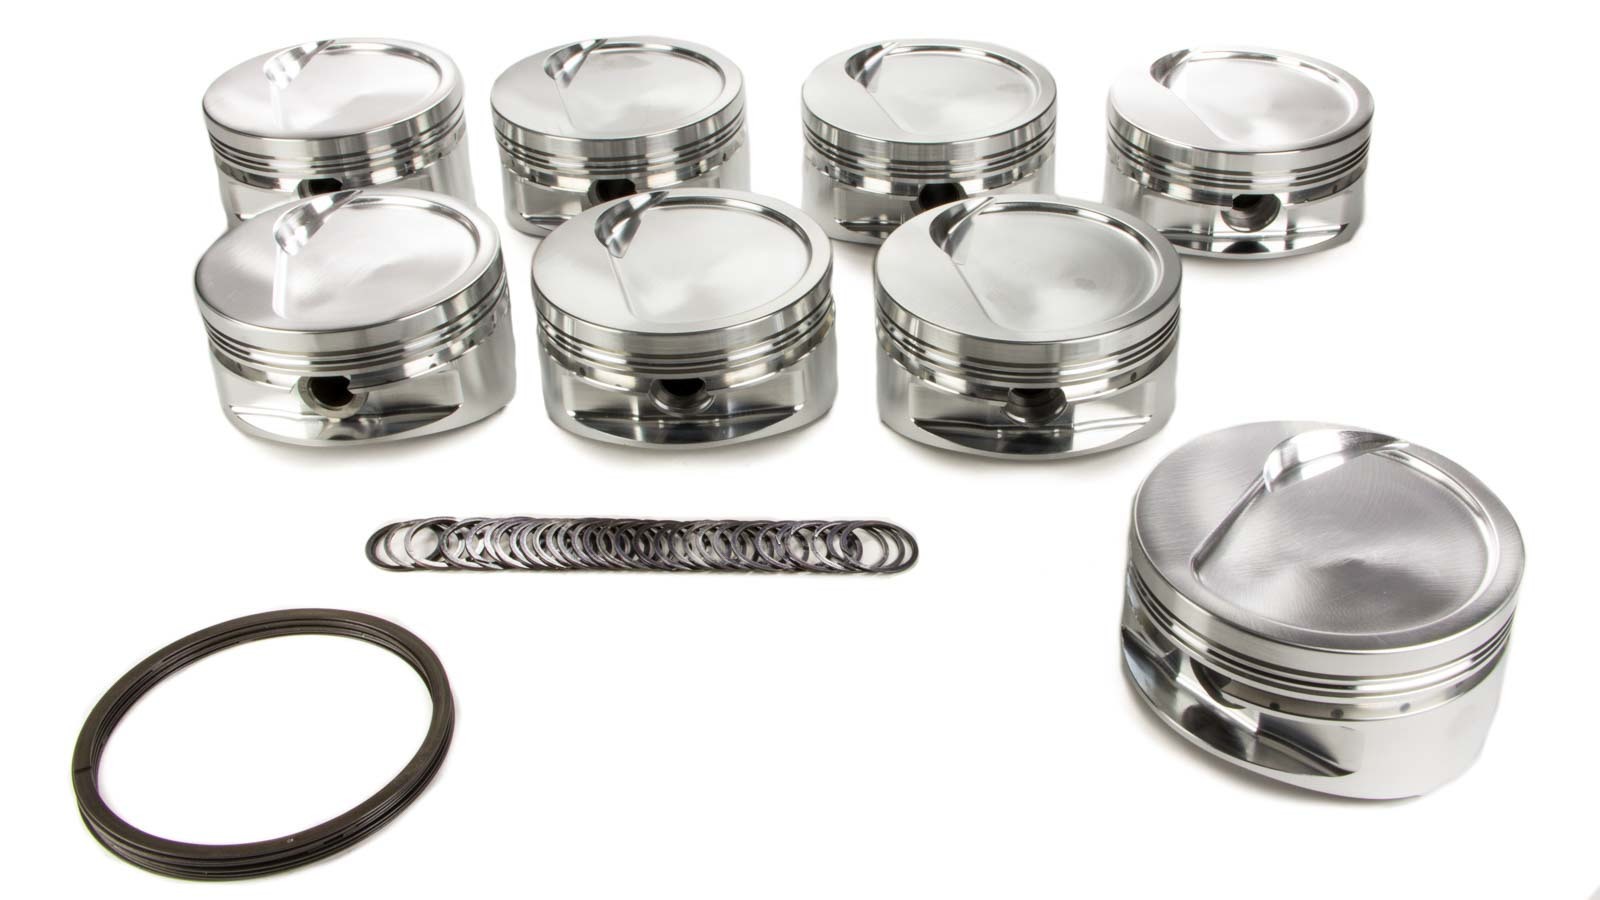 JE Pistons 257942 Piston, Big Block Inverted Dome, Forged, 4.500 in Bore, 1/16 x 1/16 x 3/16 in Ring Grooves, Minus 20.00 cc, Big Block Chevy, Set of 8